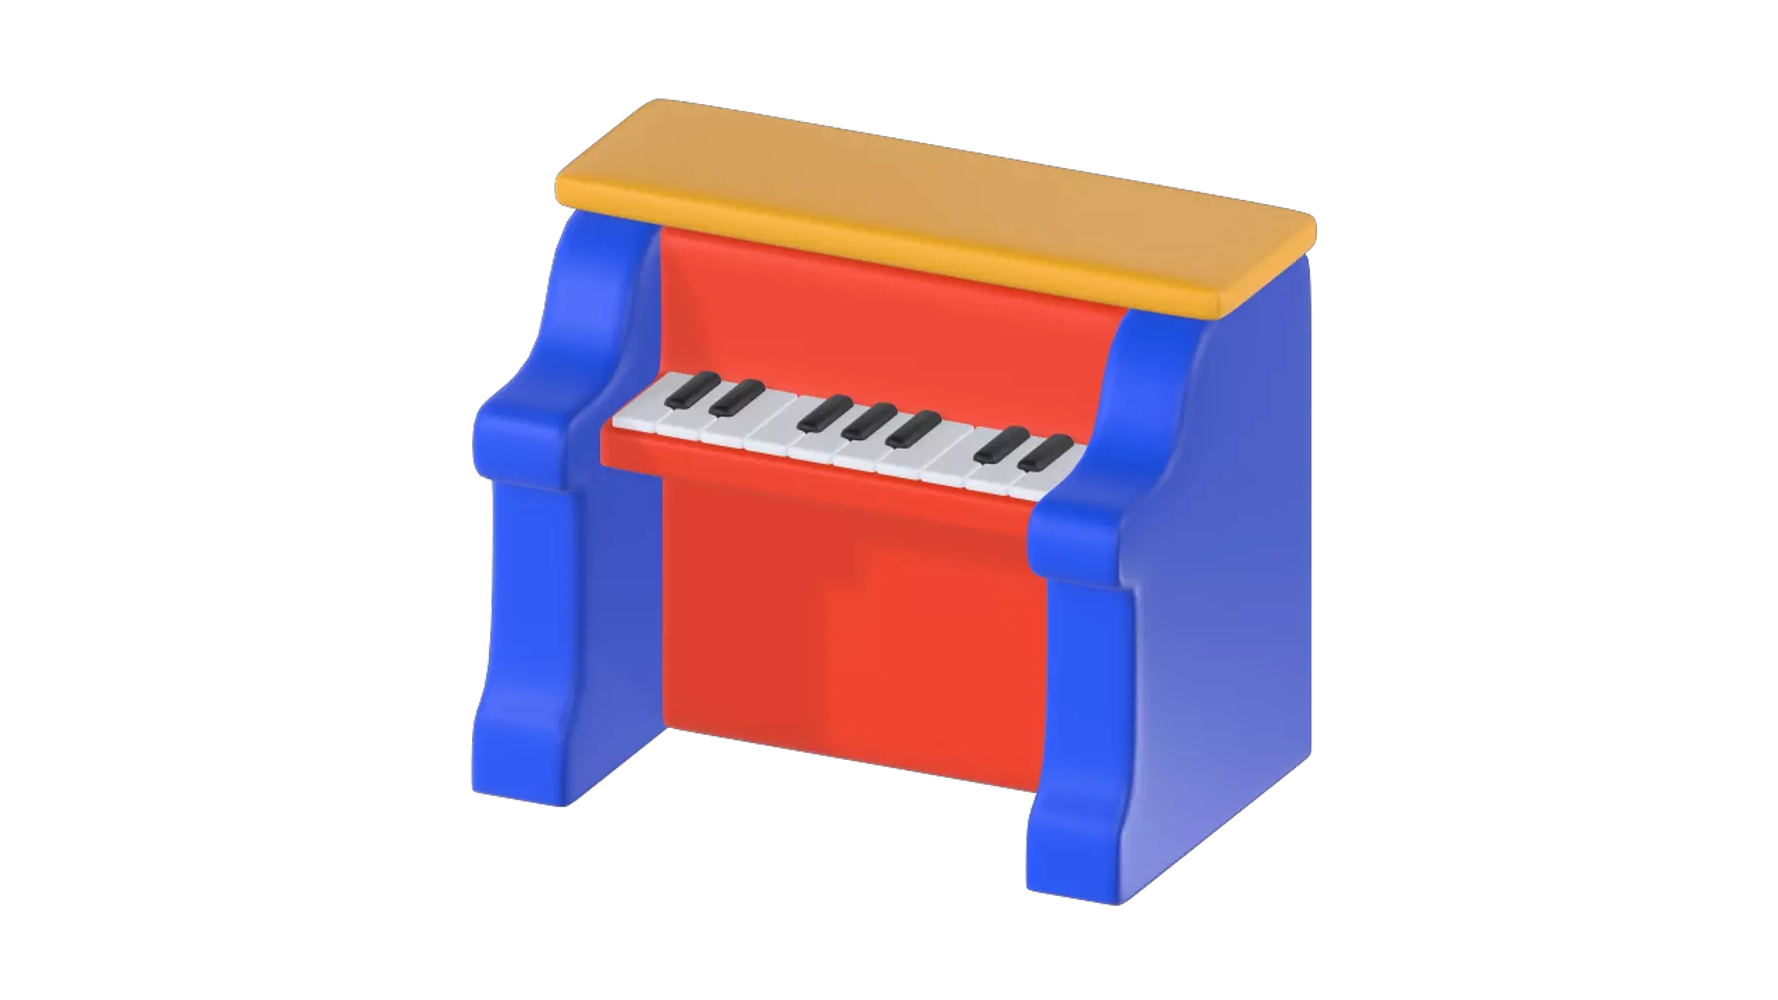 Piano Rigged 3D Graphic